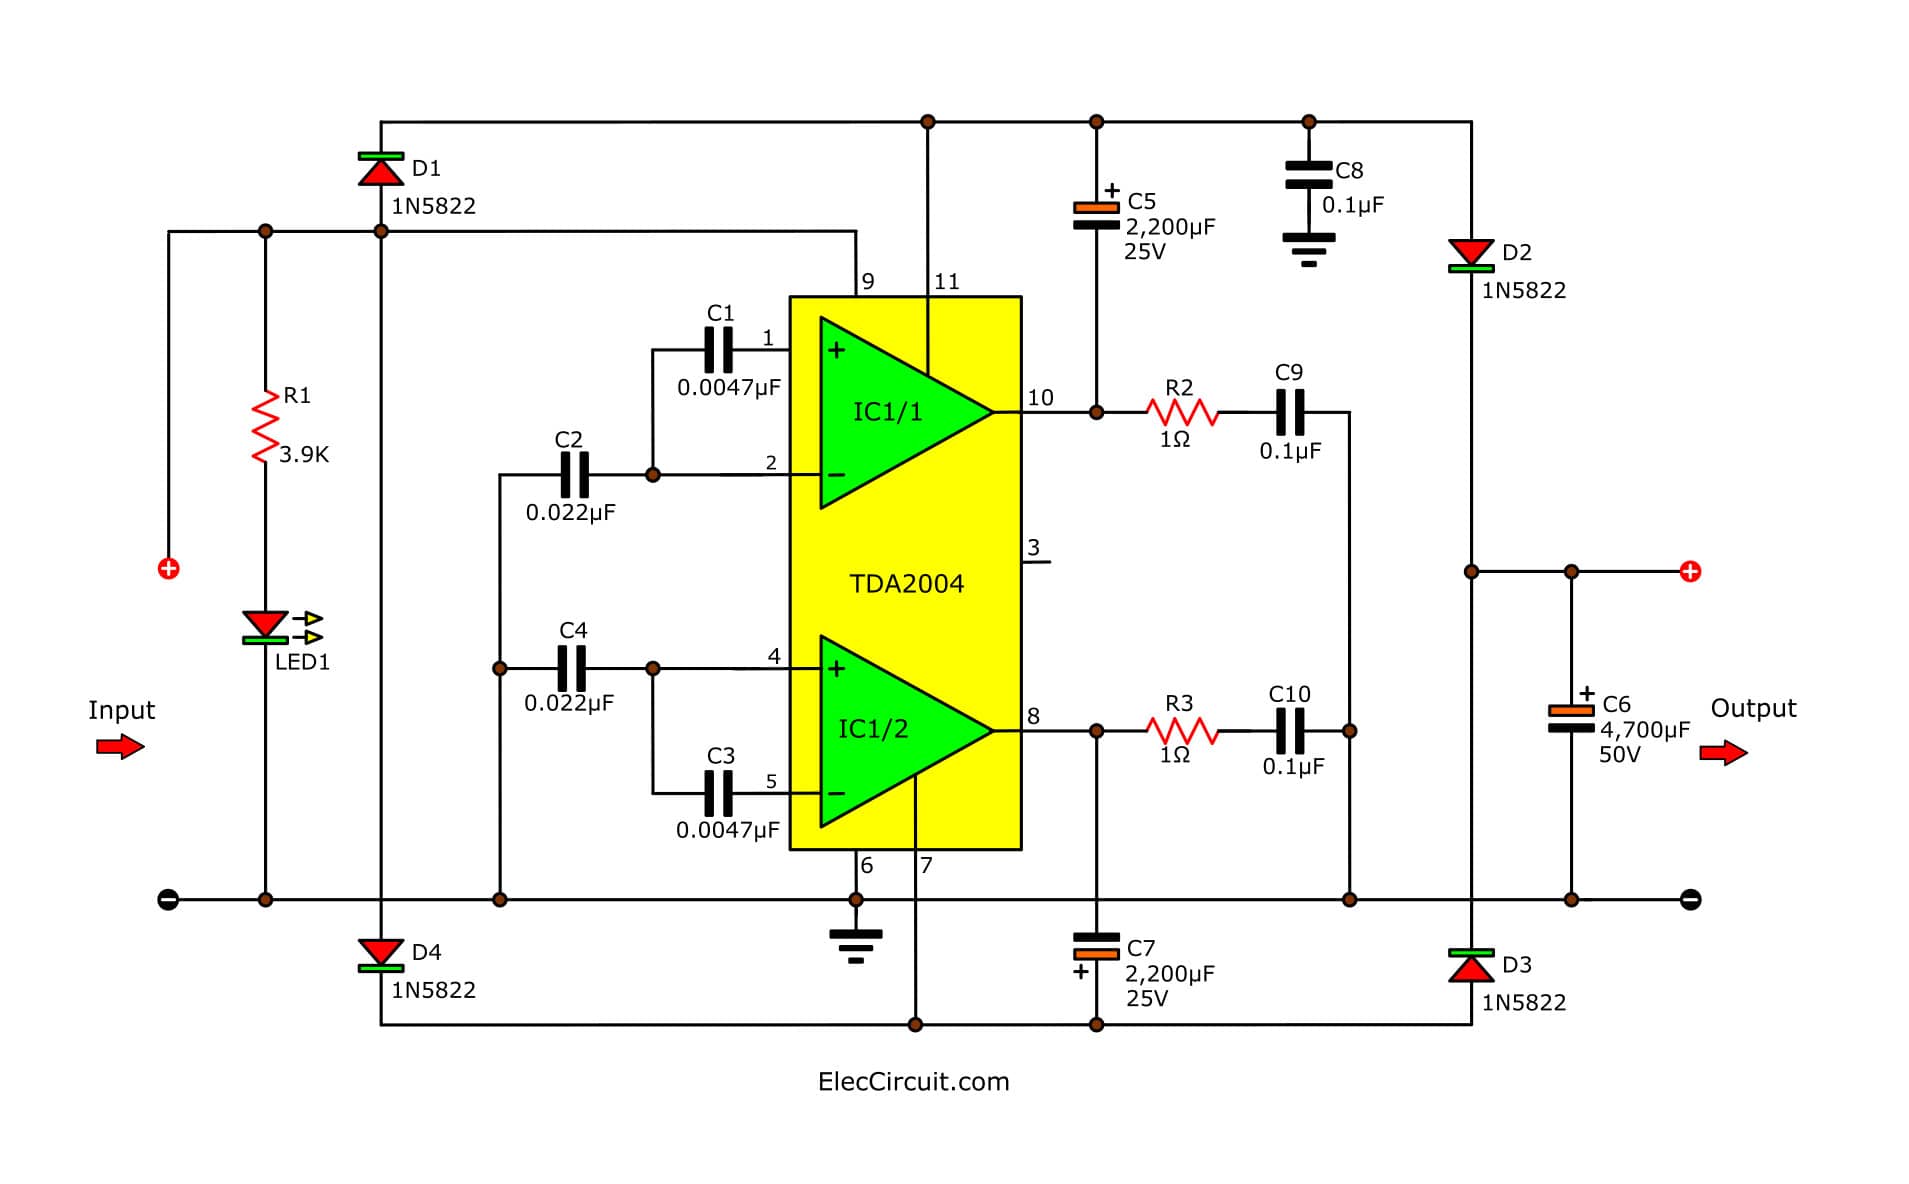 12 to 24 volt DC converter circuits - Electronic projects ...